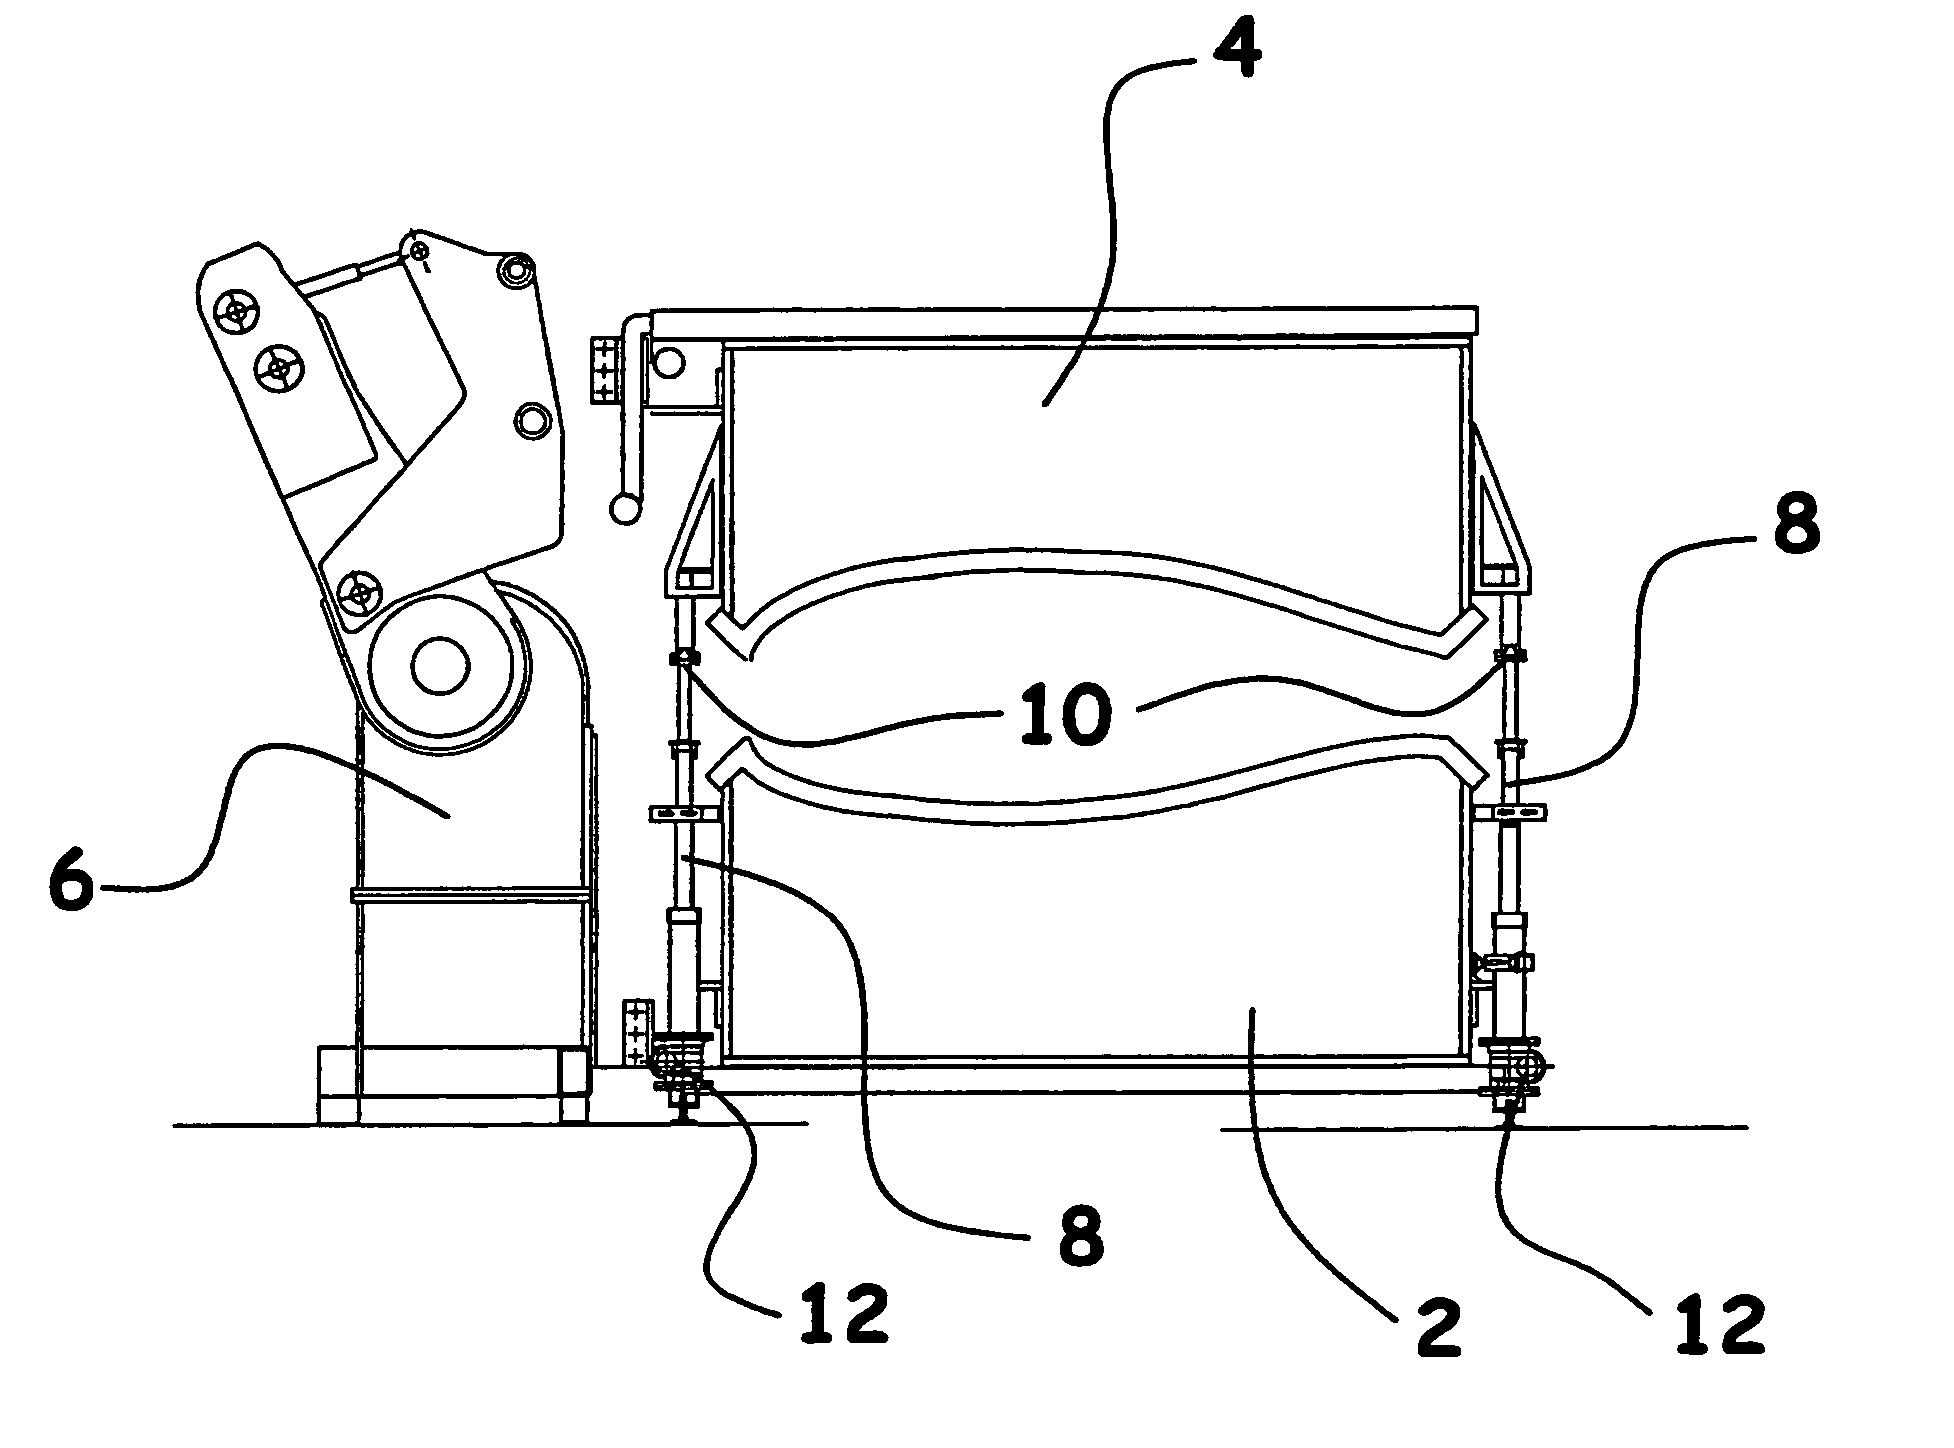 Mould assembly with closure mechanism